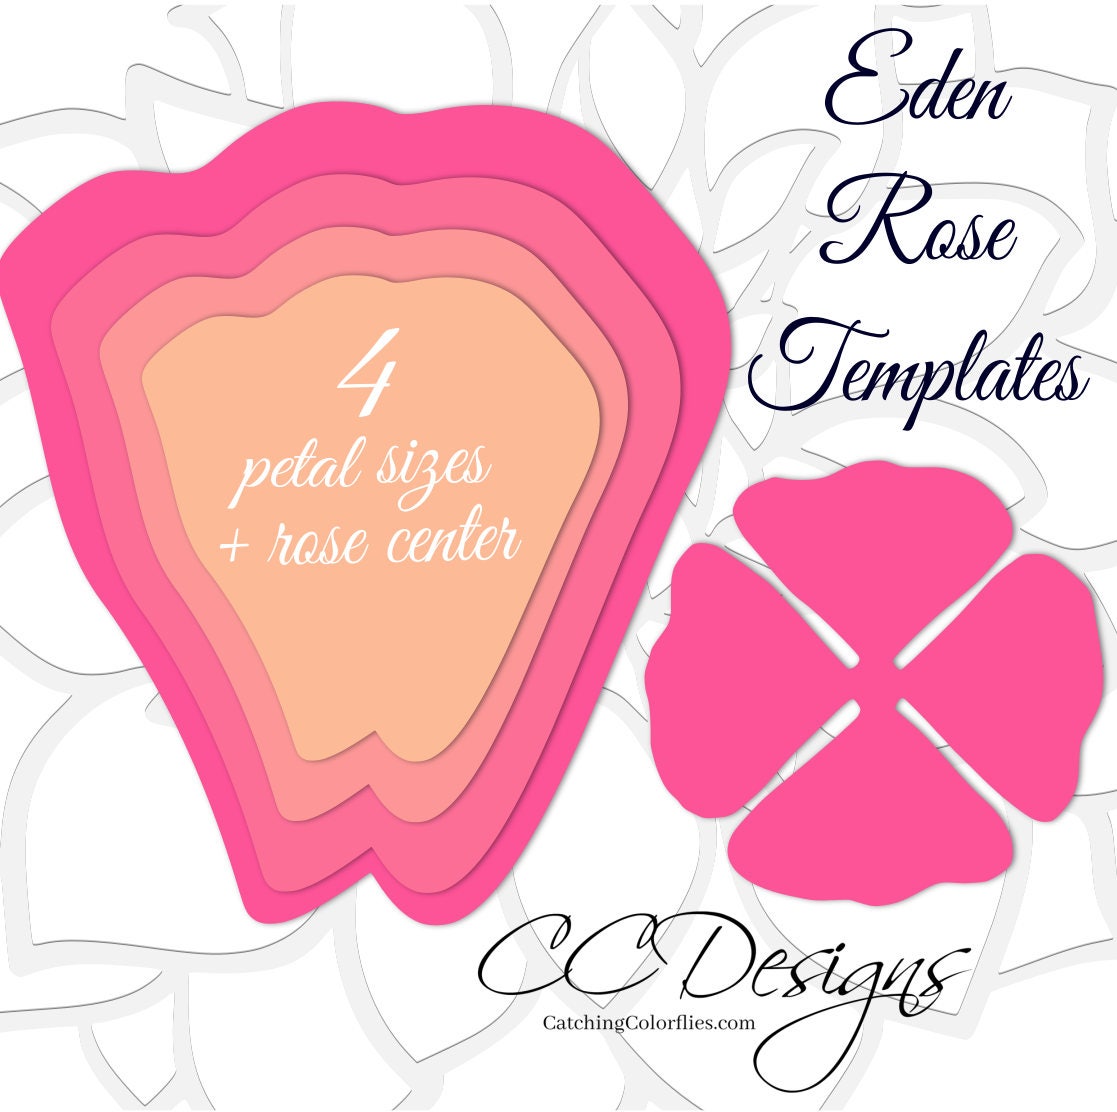 Giant Paper Rose Templates Easy Printable PDF Rose Template